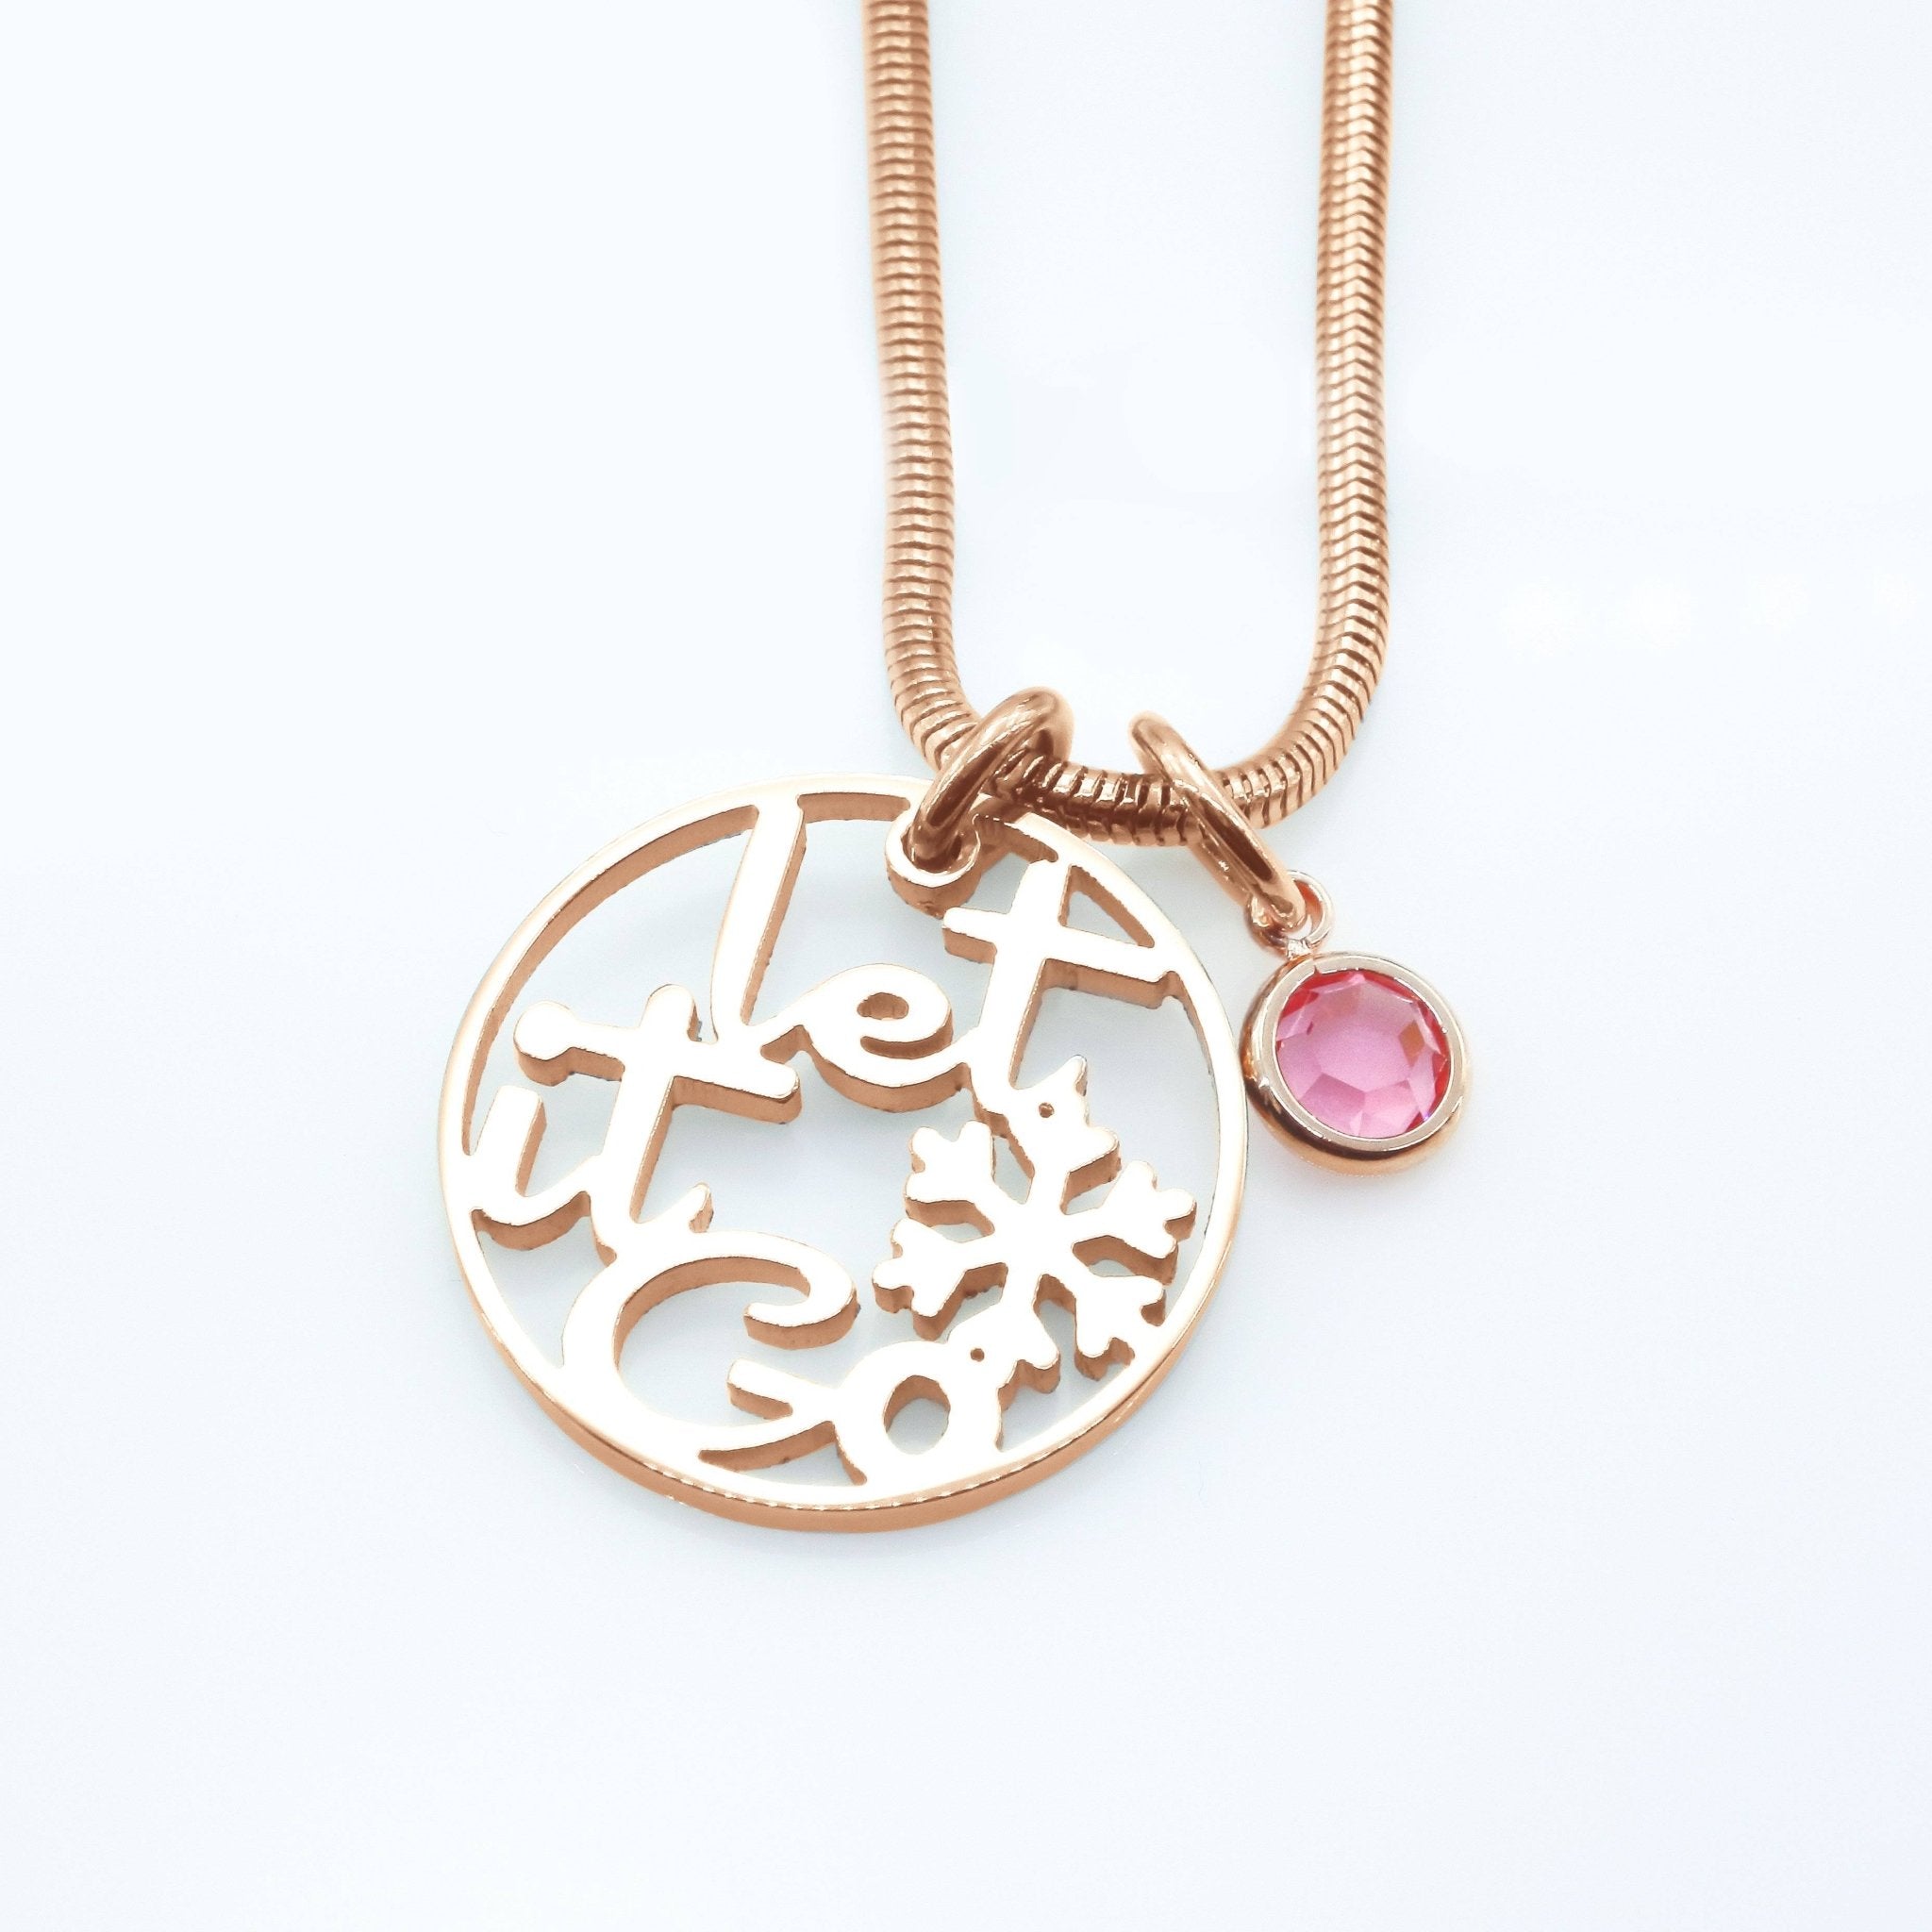 Let it GO Birthstone Necklace - Mothers Jewellery by Belle Fever